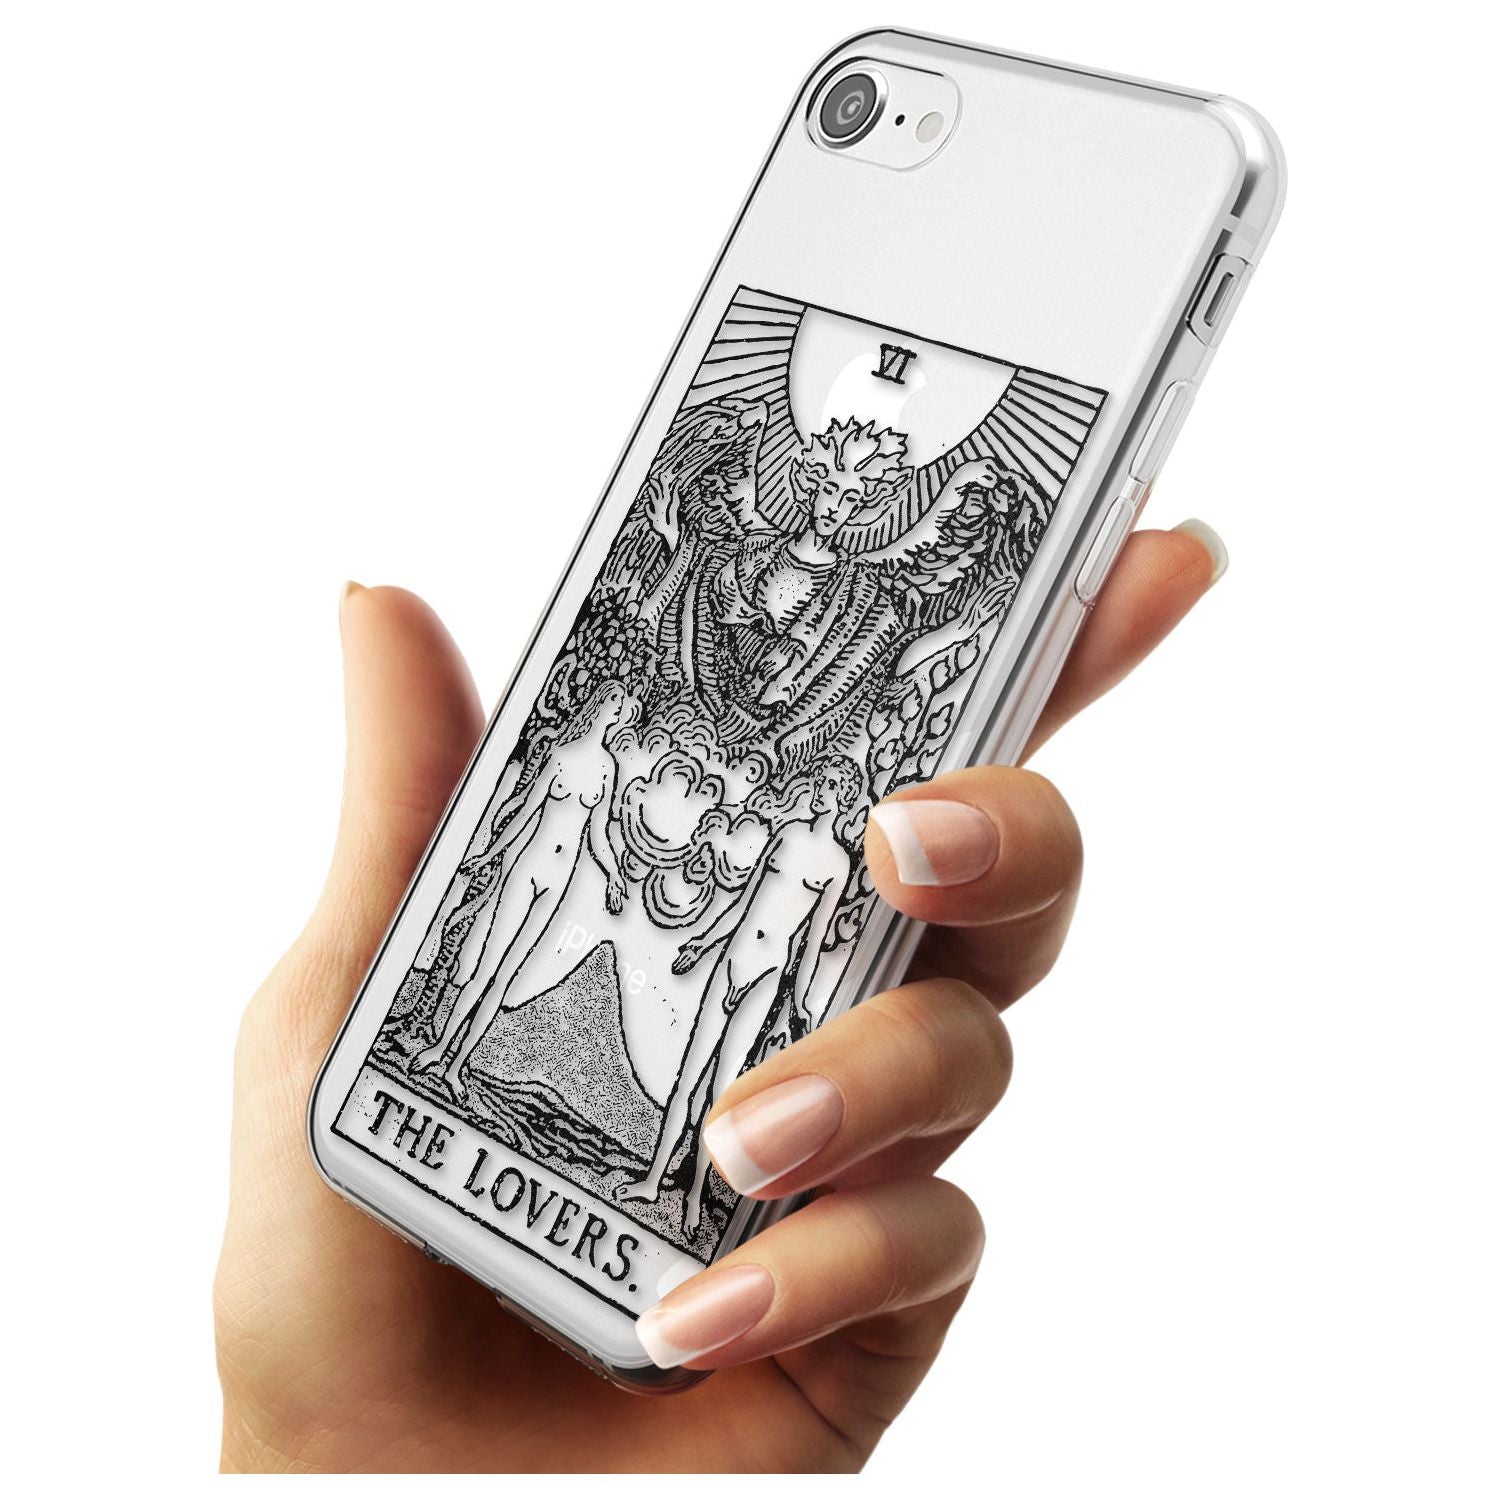 The Lovers Tarot Card - Transparent Black Impact Phone Case for iPhone SE 8 7 Plus